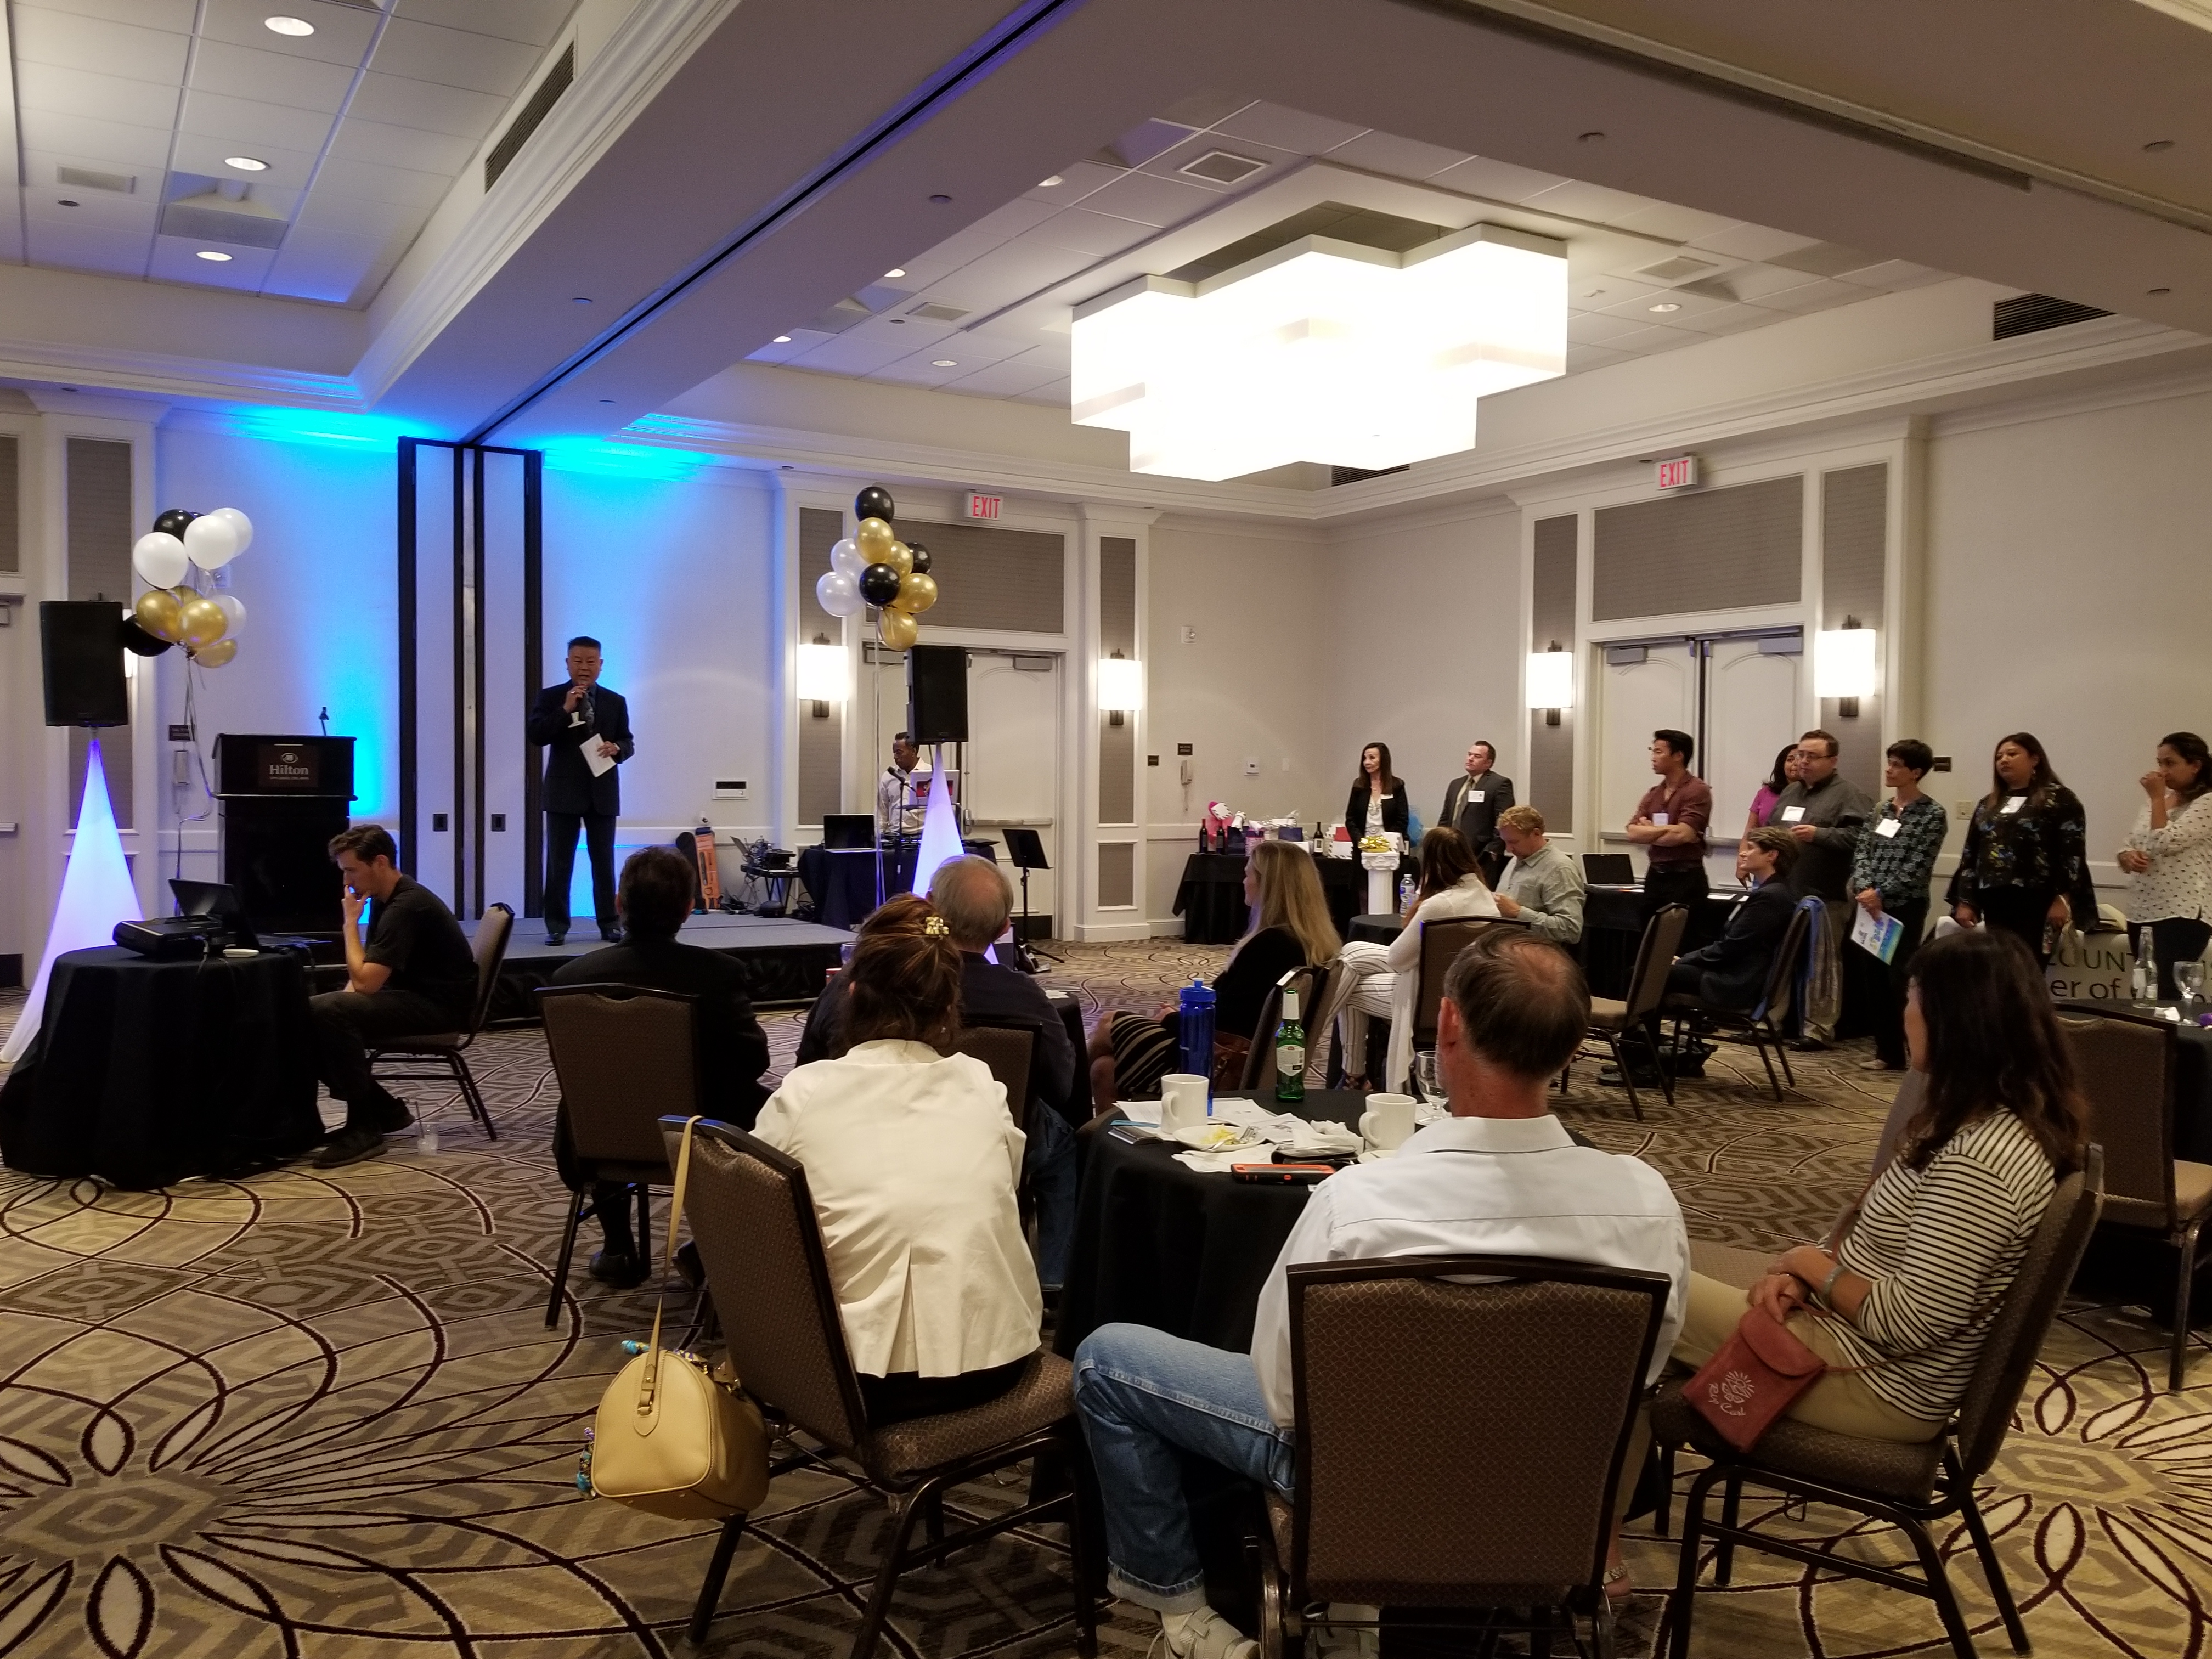 June 20, 2018 – World Connections and Social Media: 4th Annual International Business Mixer